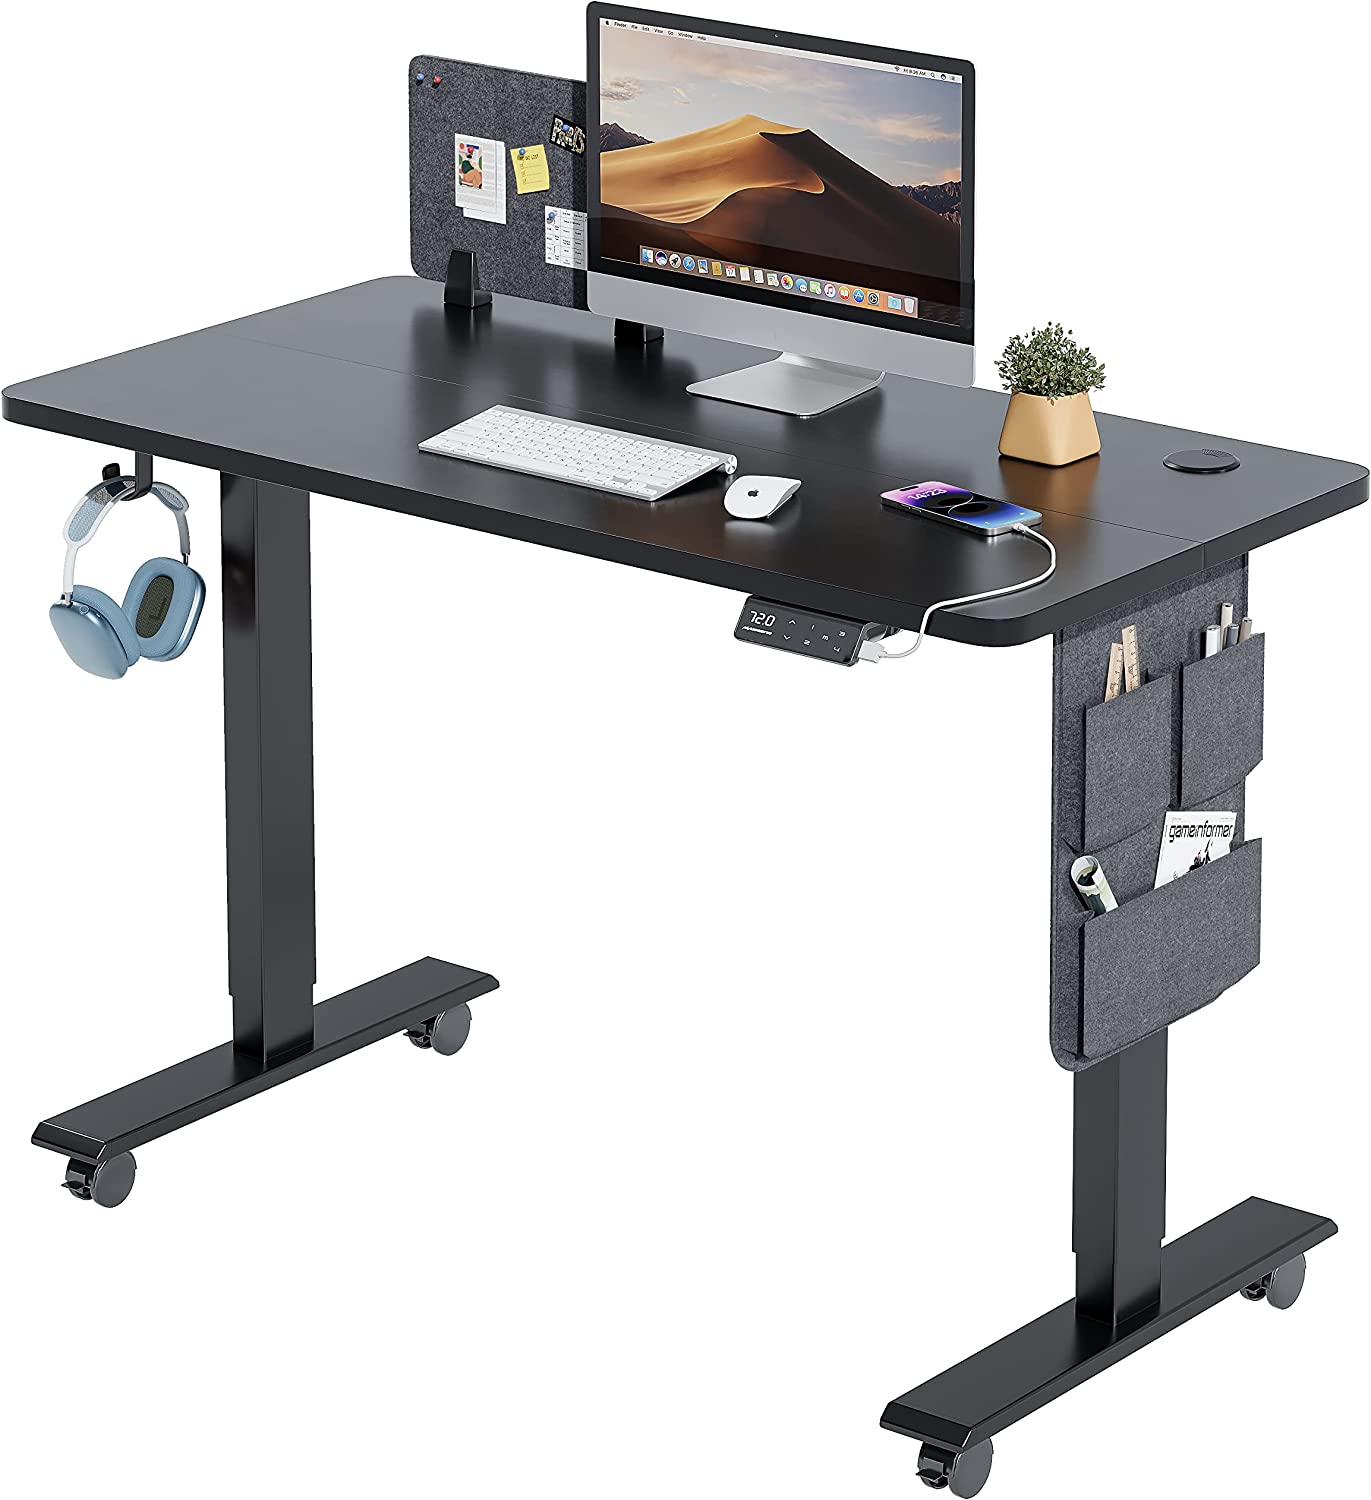 Maidesite SN1 Black electric standing desk for home office and studio